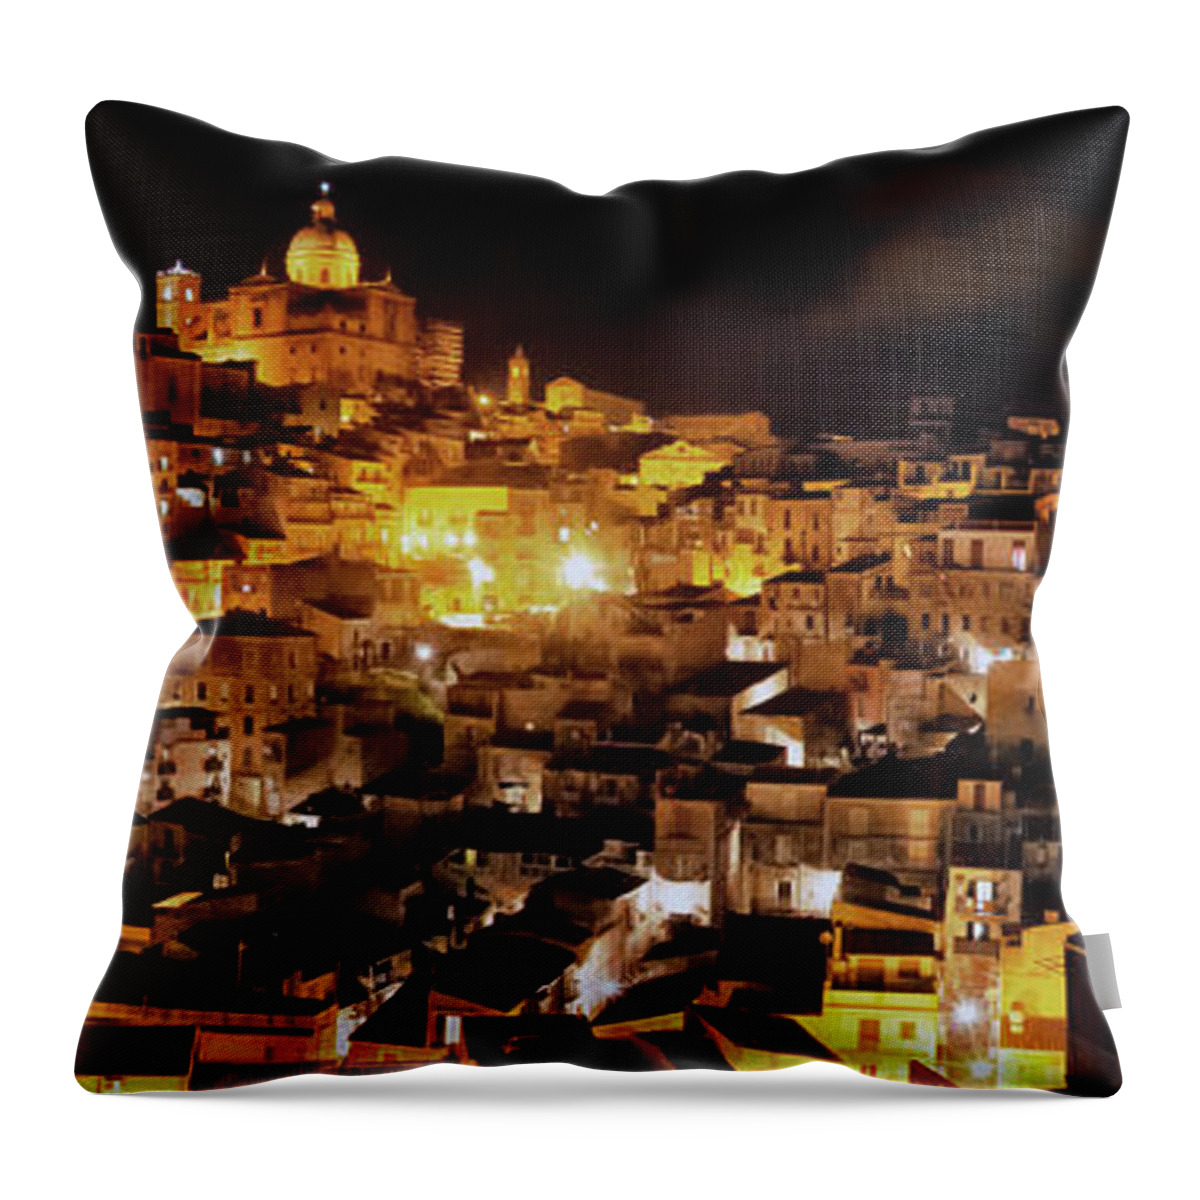  Throw Pillow featuring the photograph Piazza Armerina at Night by Patrick Boening